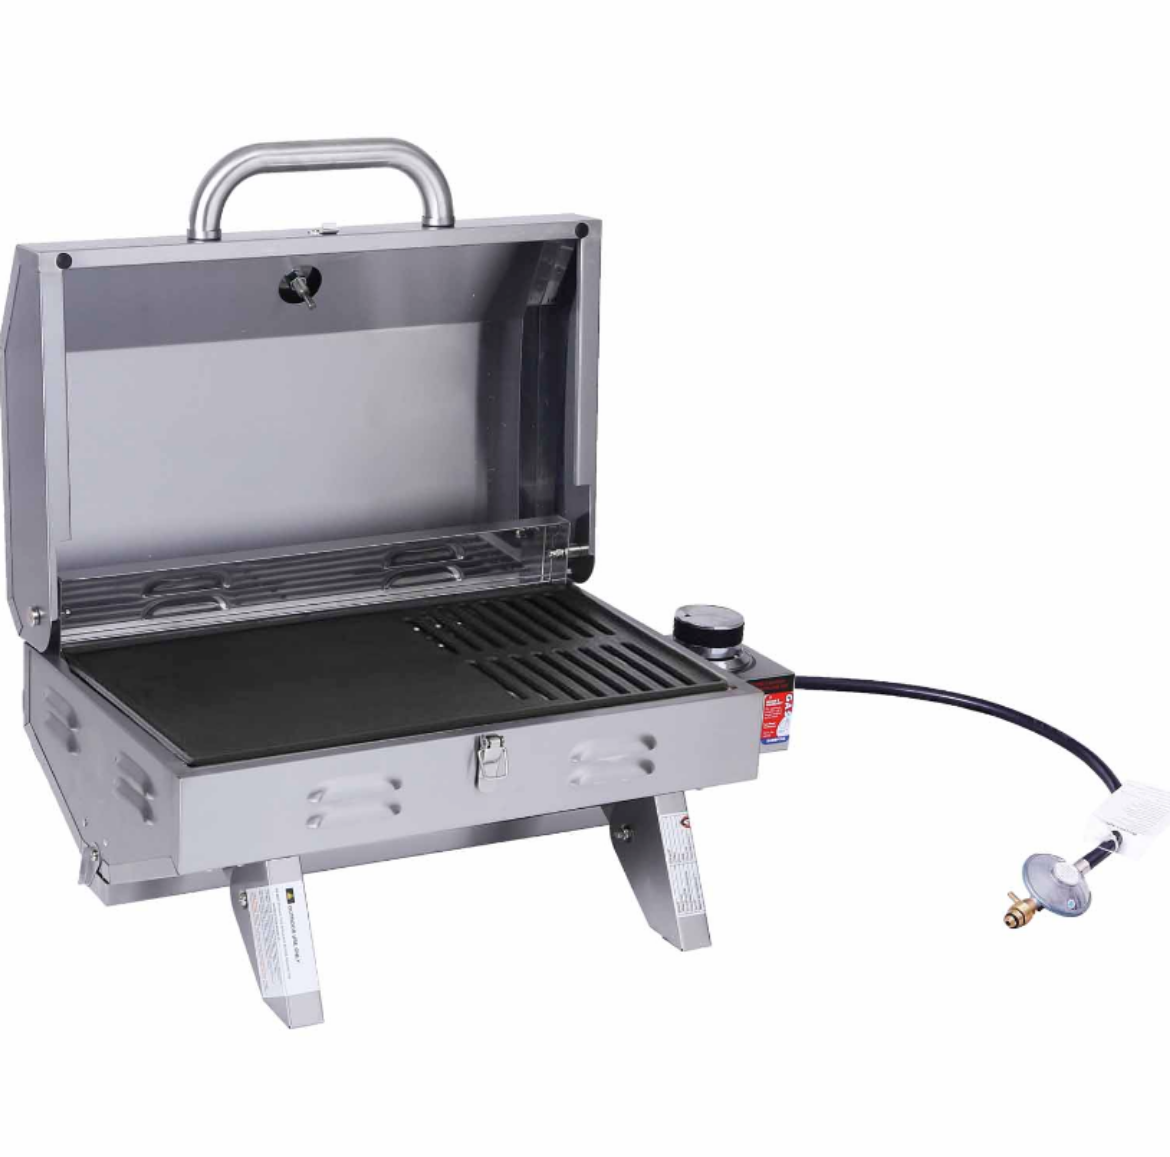 opnå blive imponeret hjerne GCPCBBQ Grill Chief Portable Camping And Patio BBQ | The Boss Shop  Queensland Australia